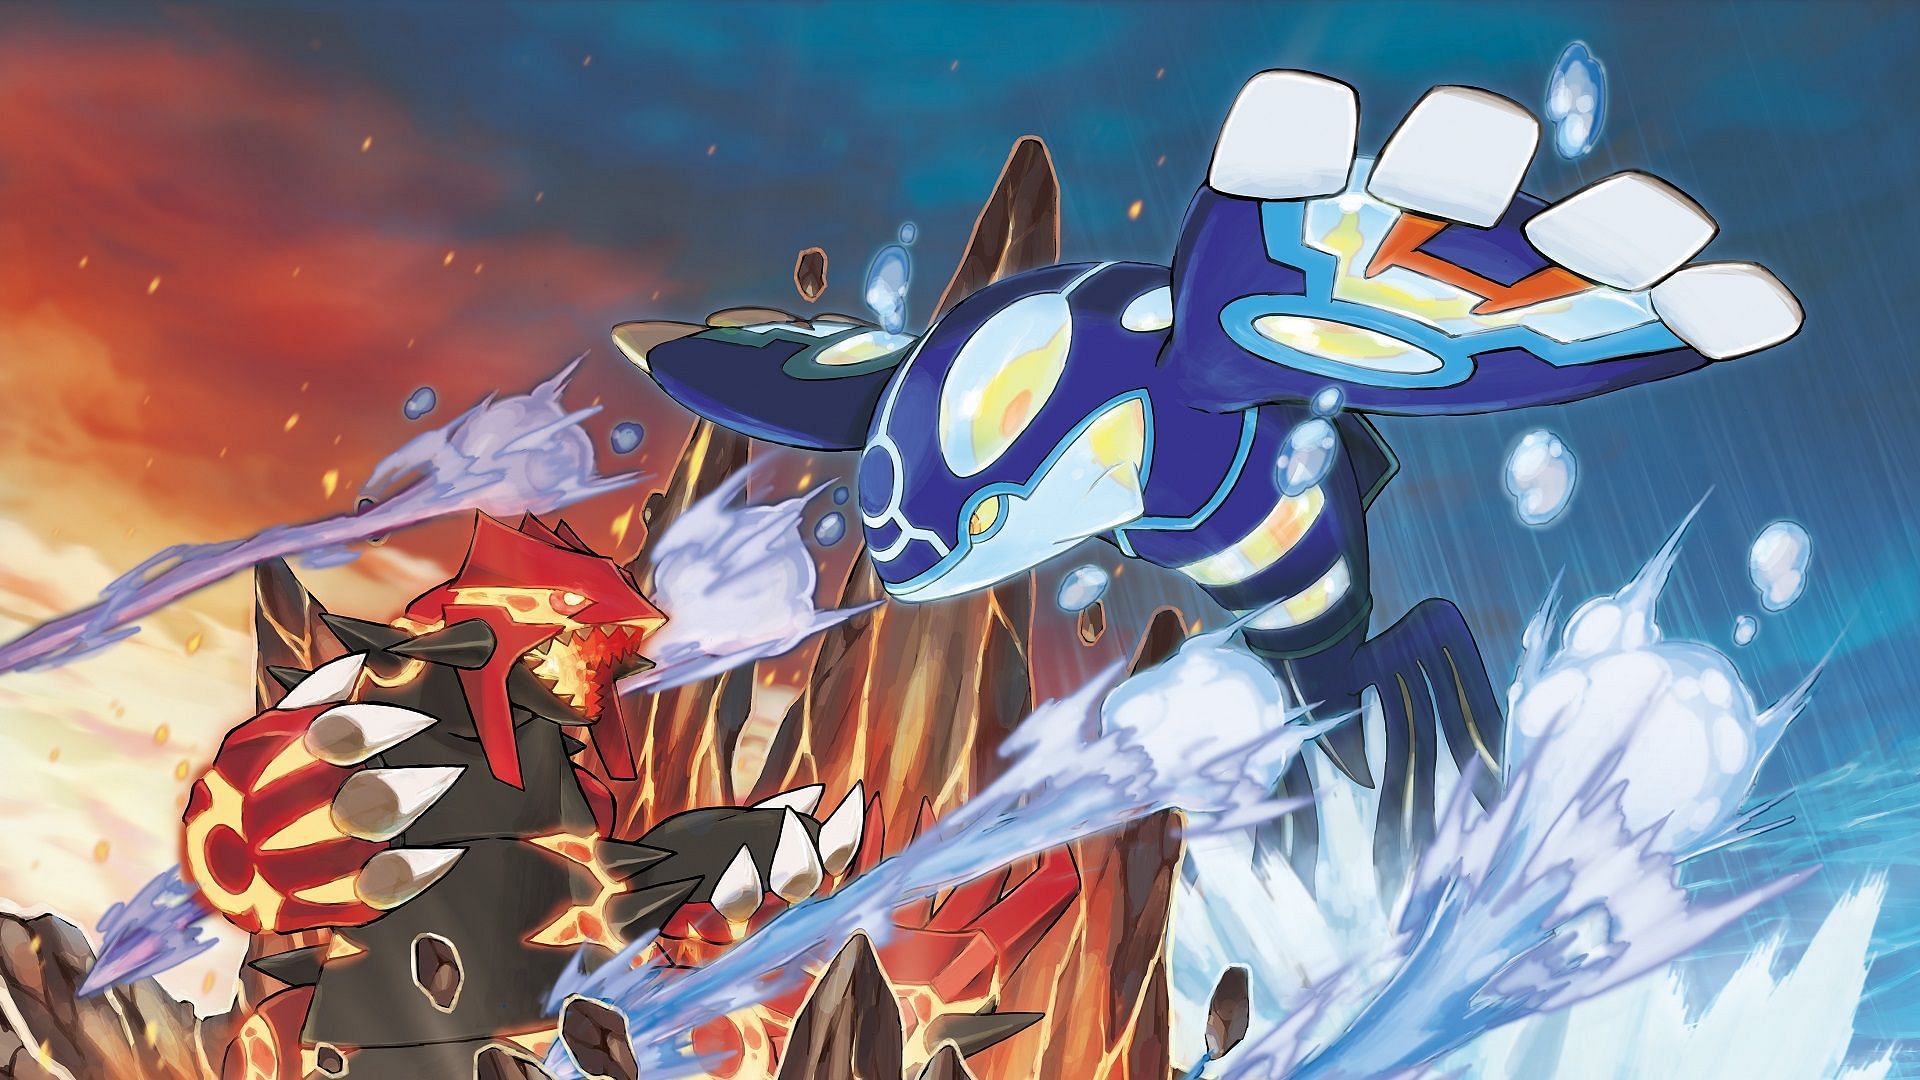 Groudon and Kyogre battling in their Primal Forms (Image via The Pokemon Company)